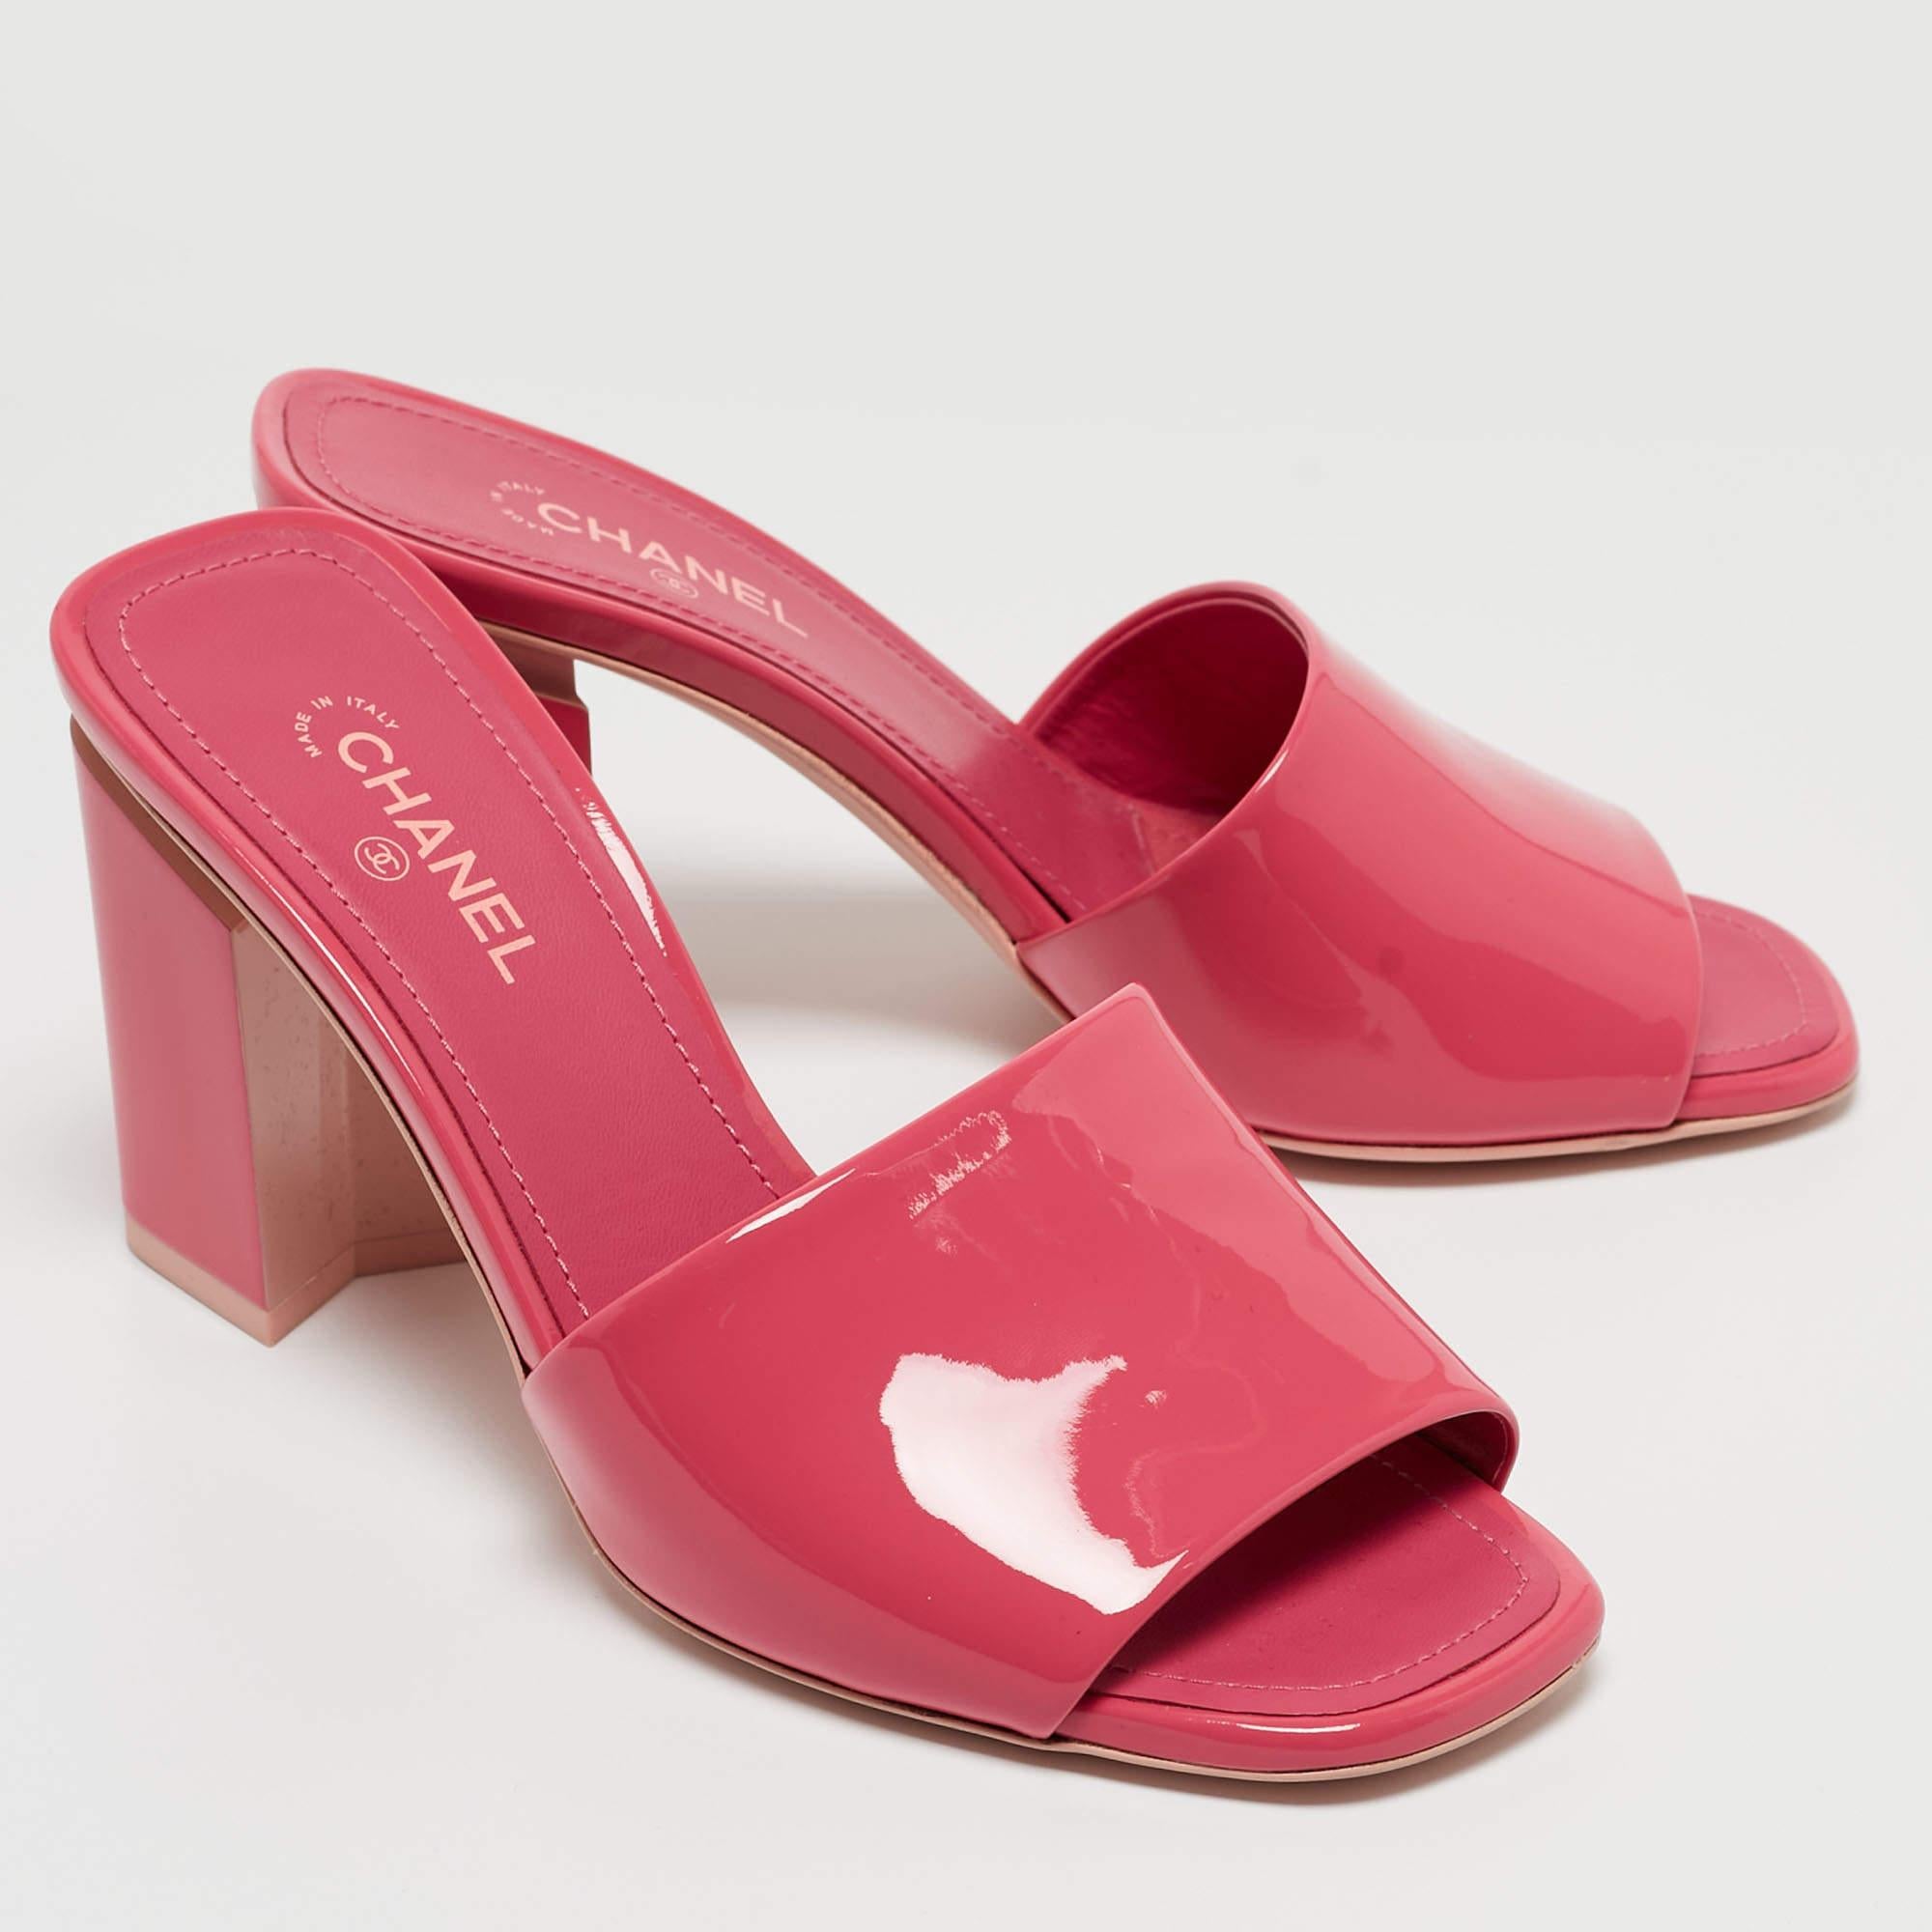 Chanel Pink Patent Leather CC Slide Sandals Size 36 1